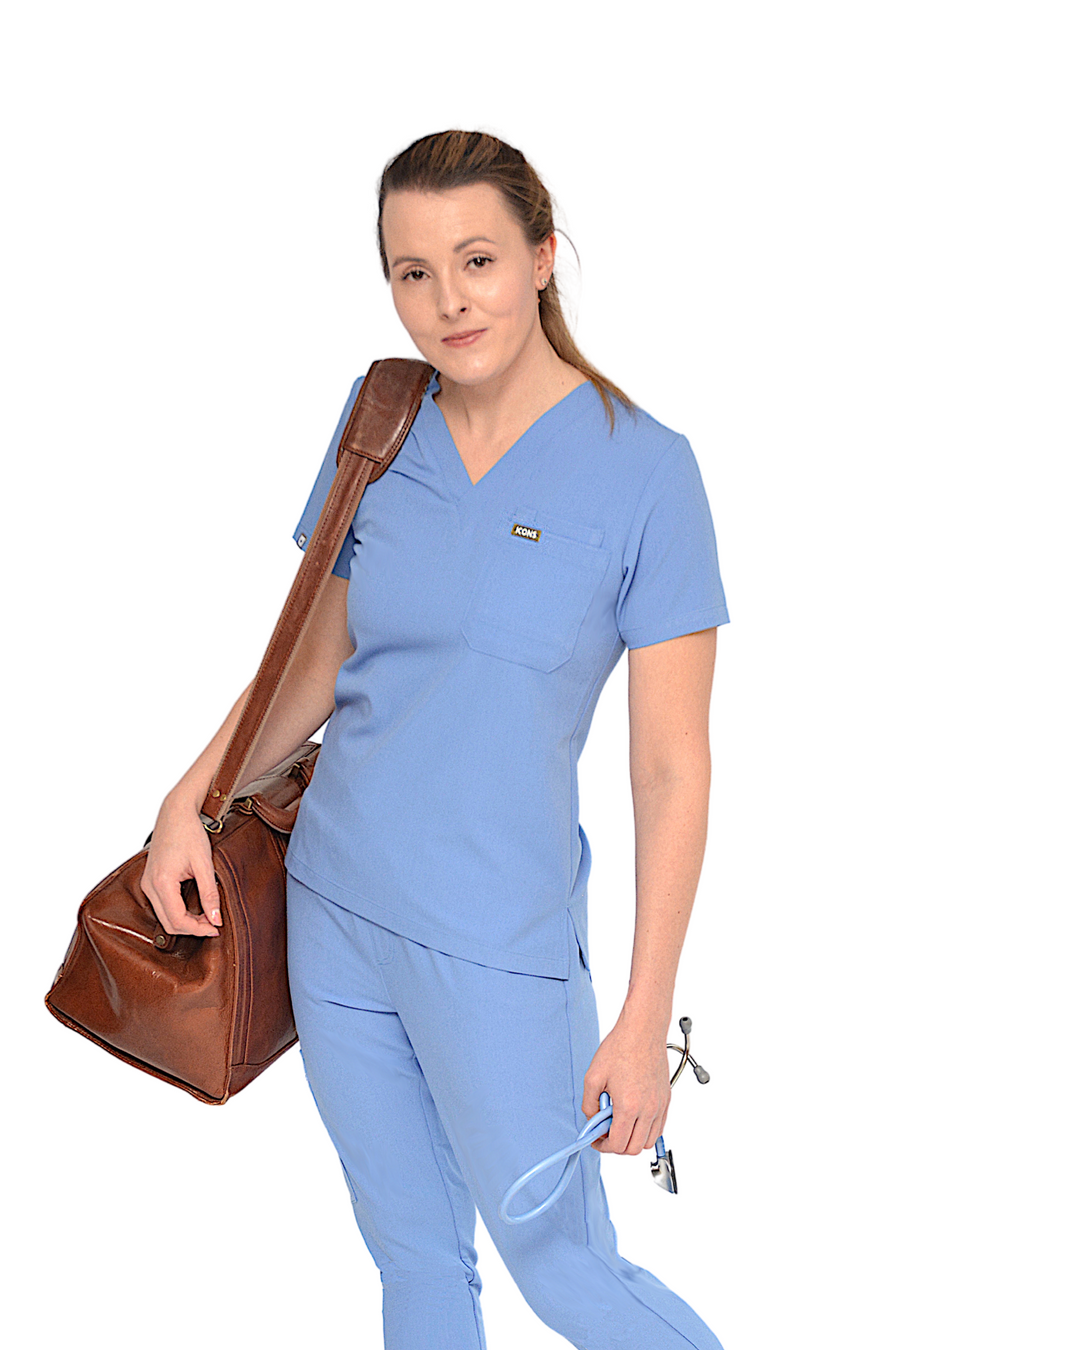 Celeste Blue Scrub Top - Chanelle Scrub Top - Fit For Icons